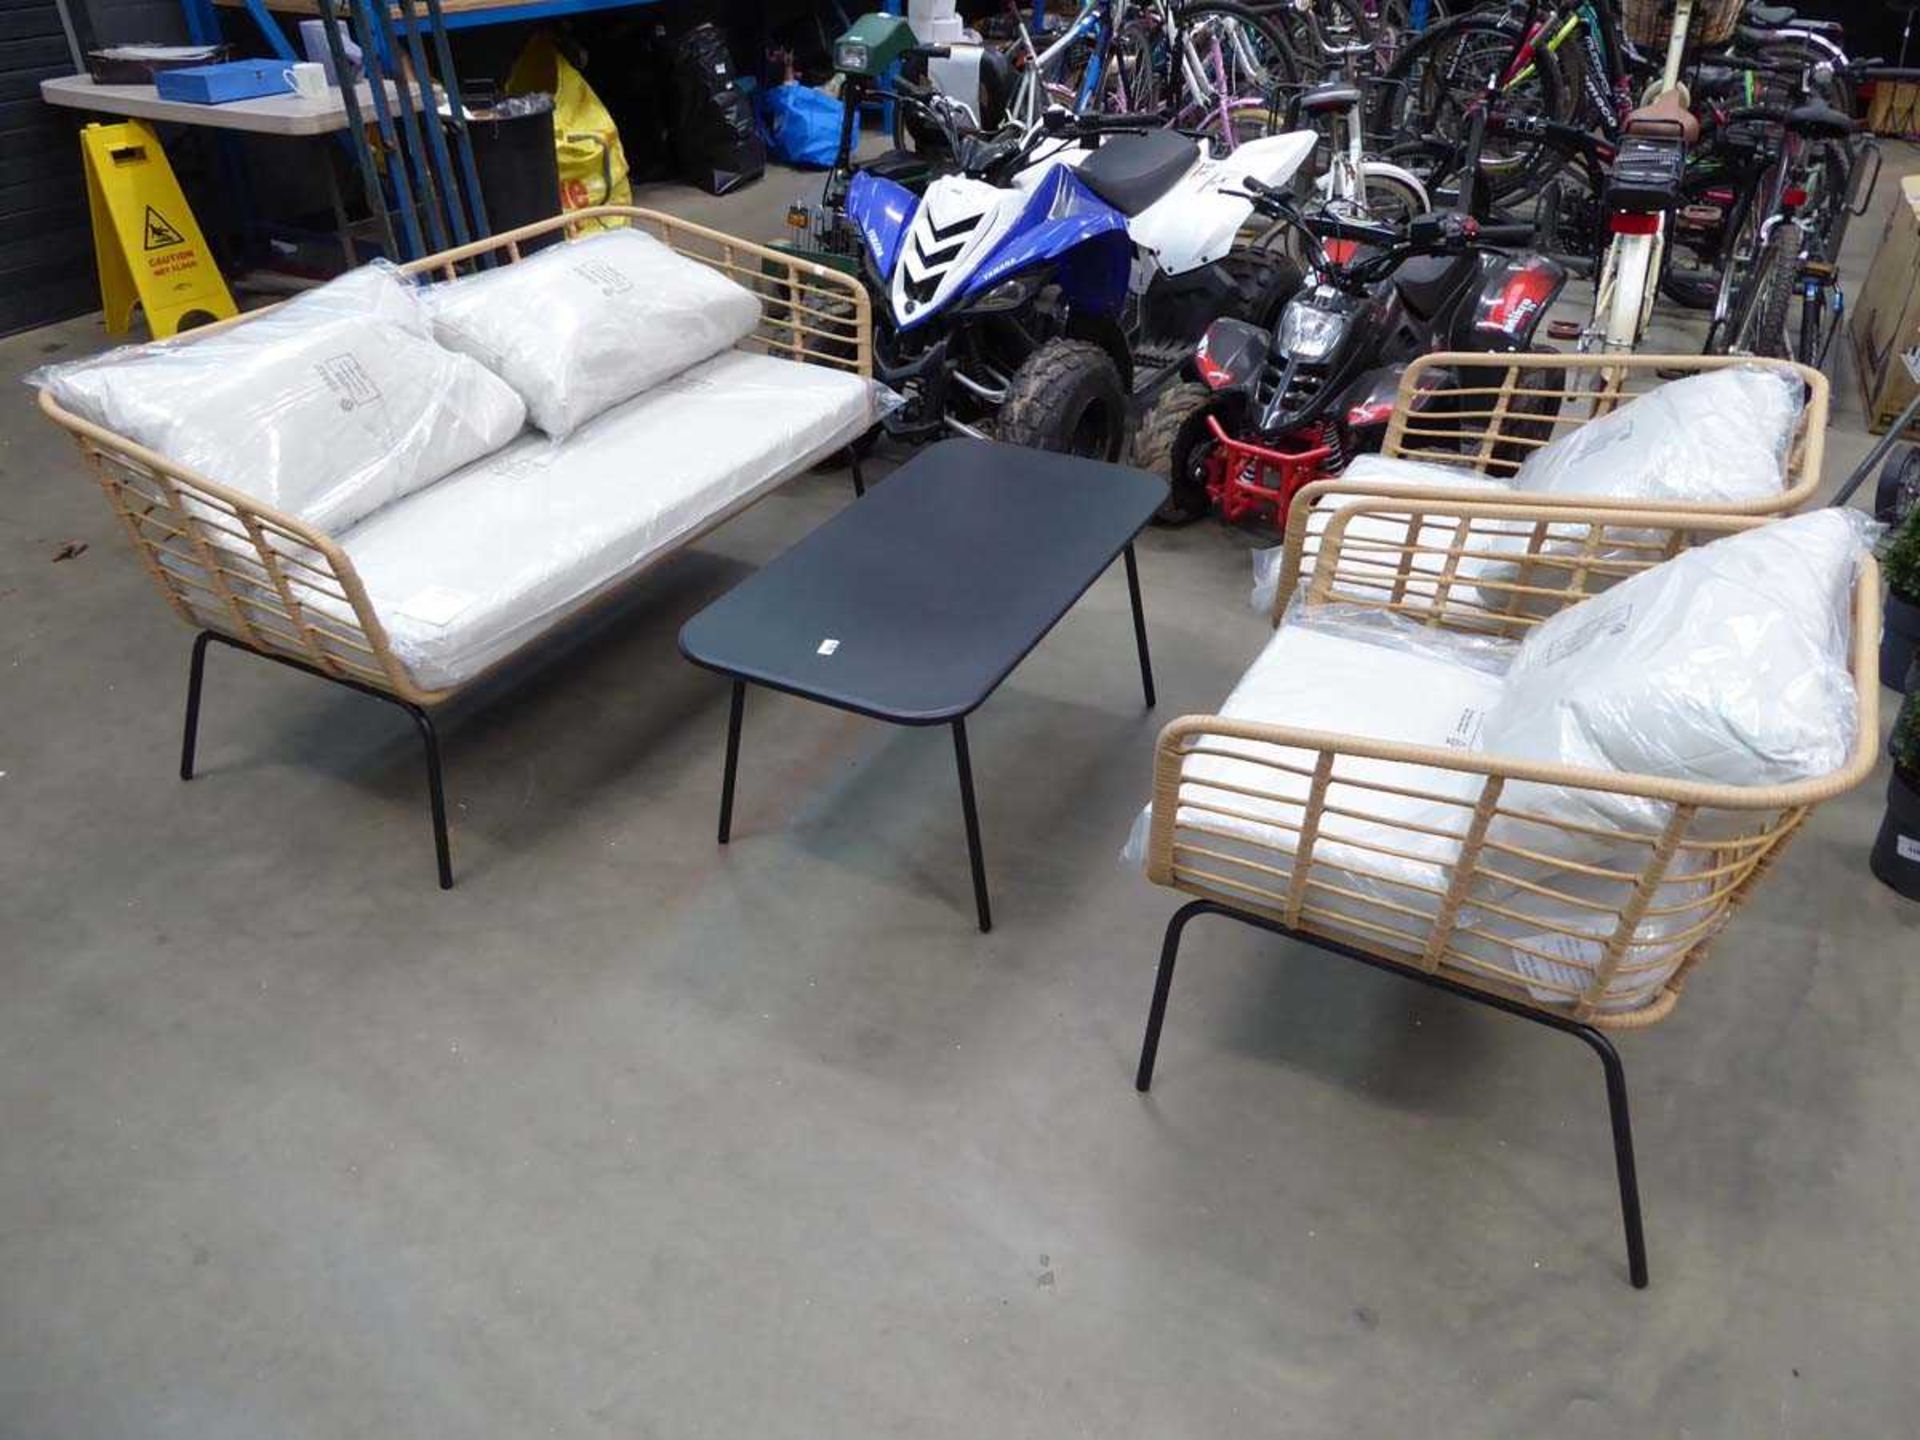 4 piece garden set consisting of 2 seater sofa, 2 chairs and rectangular metal table - Image 2 of 2